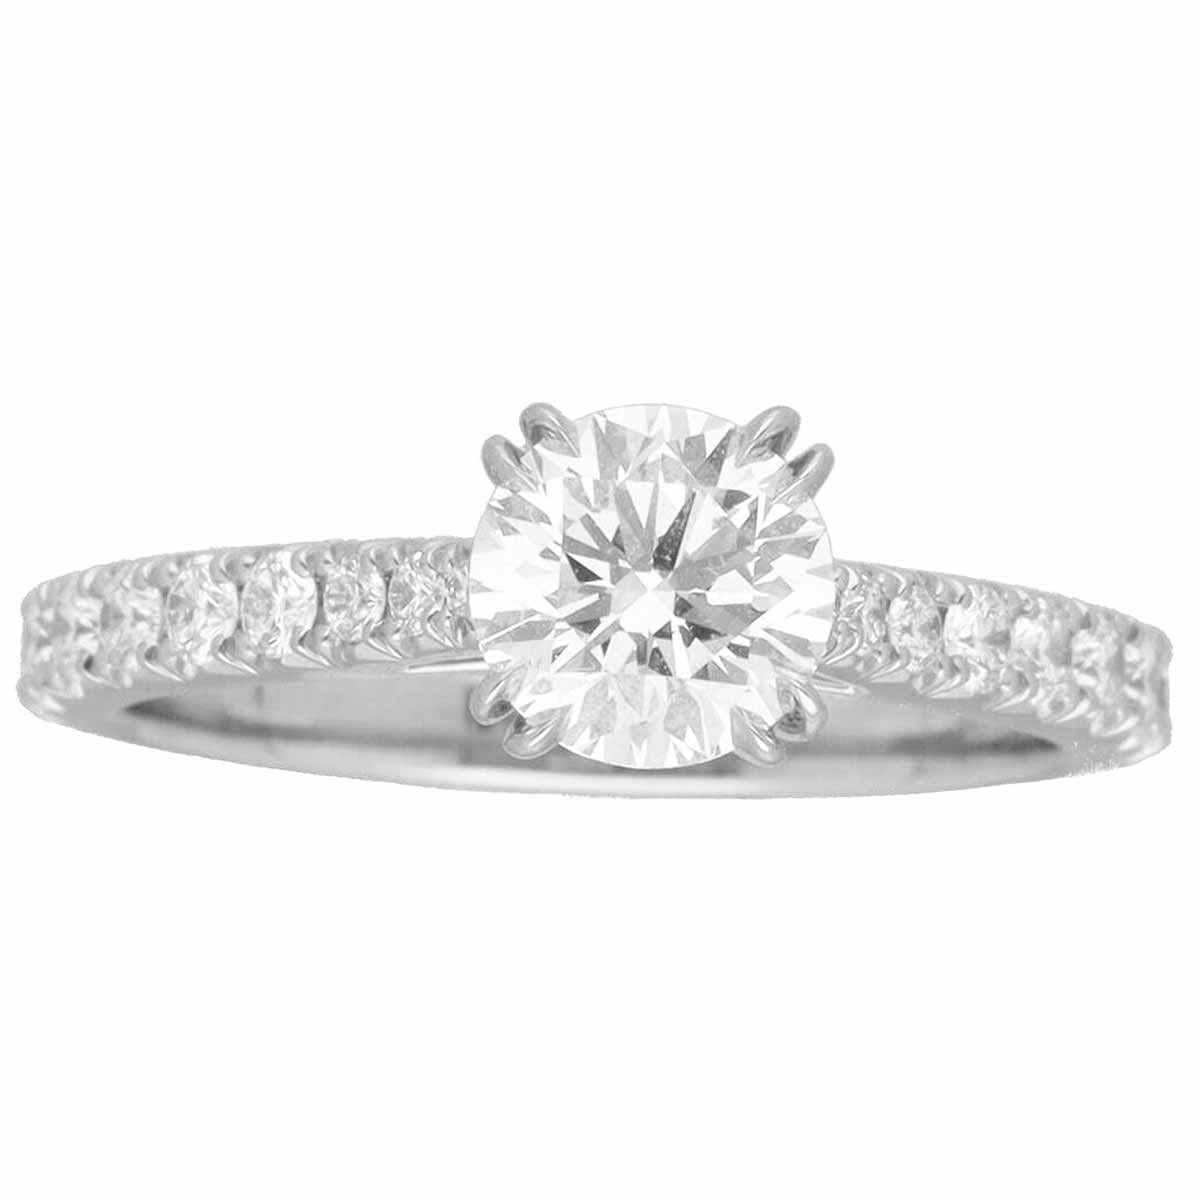 Brand:HARRY WINSTON
Name:Brilliant Love Ring
Material:1P diamond (0.75ct F-VVS2-3Ex), 20P side diamond, PT950 platinum
Weight:4.0g（Approx)
Ring size:British & Australian:H 1/2  /   US & Canada:4 1/4 /  French & Russian:47 /  German:15 /  Japanese: 7